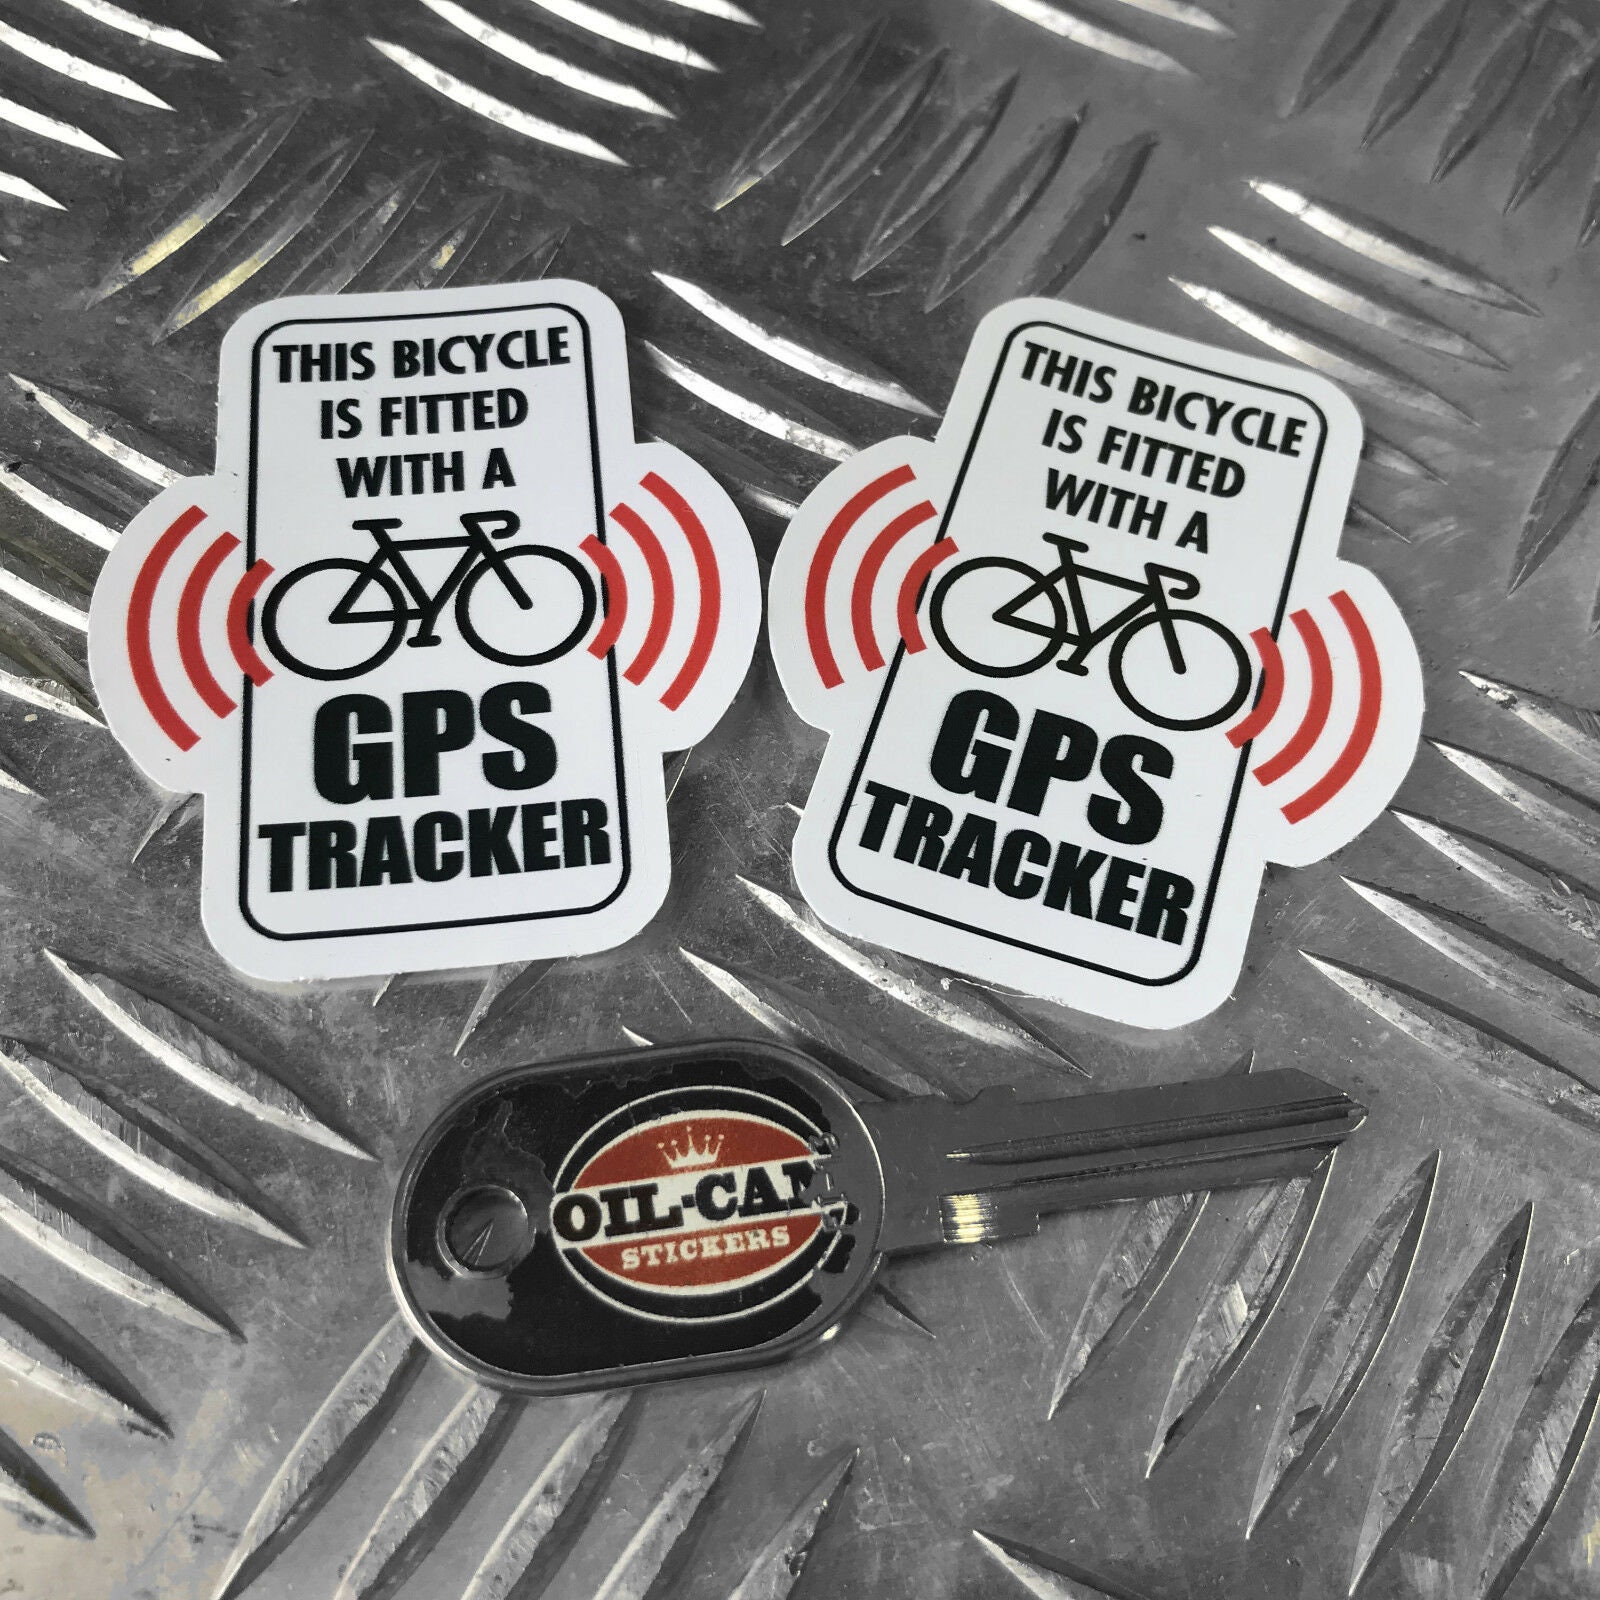 4 STICKERS ALARME UTILITAIRE - TRACEUR GPS